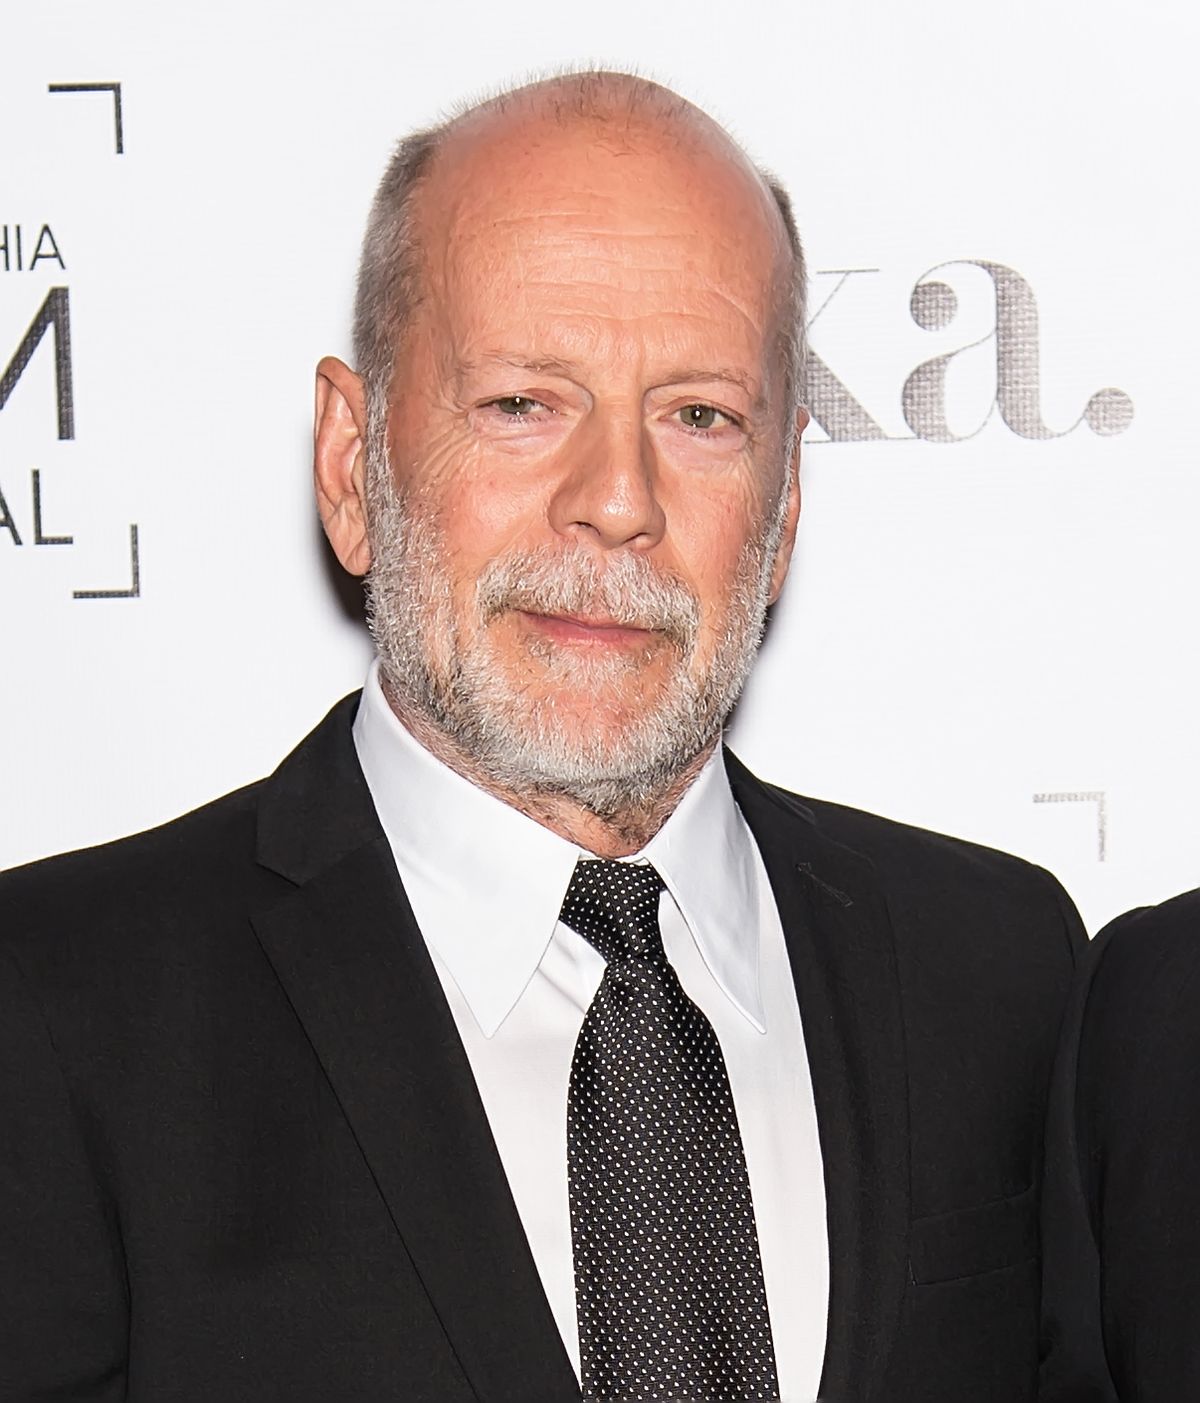 Bruce Willis is awarded with the Lumiere Award during The 26th Philadelphia Film Festival in Philadelphia